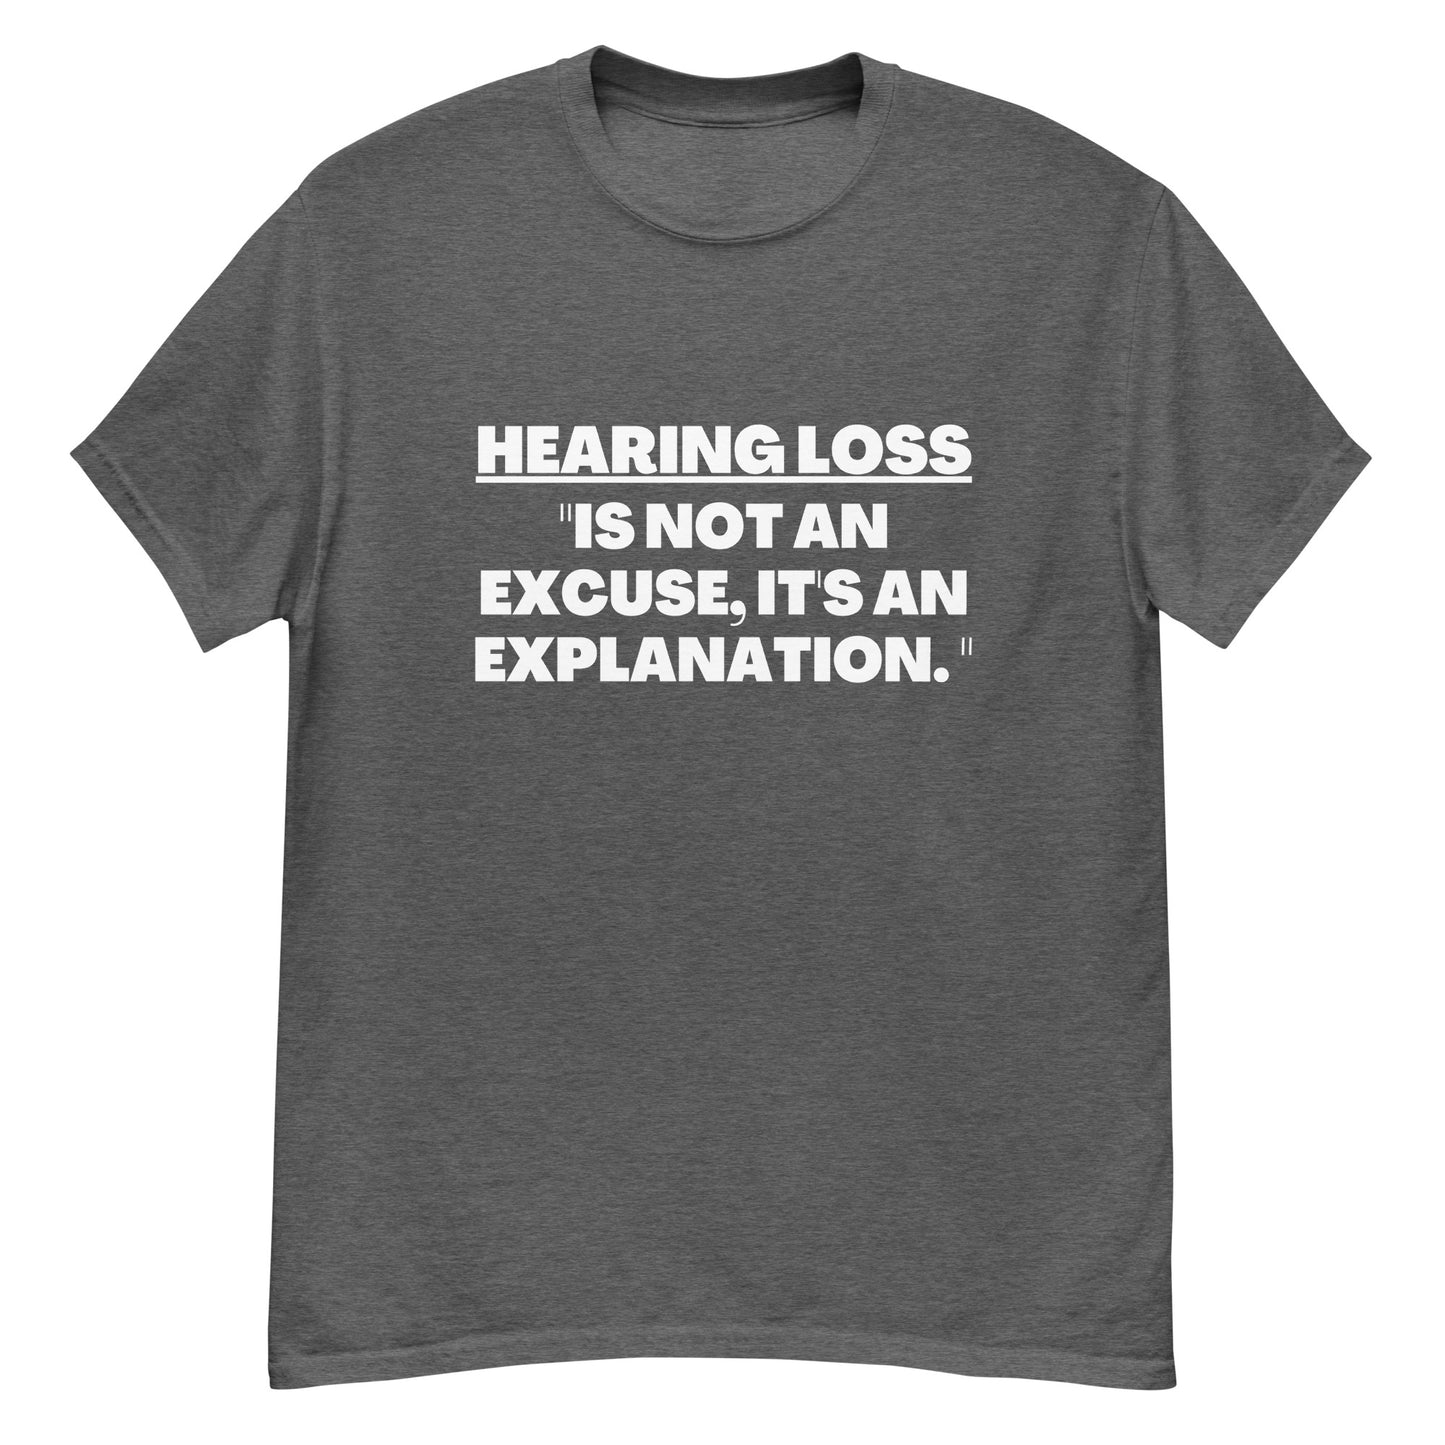 Hard of Hearing Support, Hearing Loss quote, Hearing impaired awareness, Hearing aid, Deaf, sign language ASL,Hard of hearing Gift.